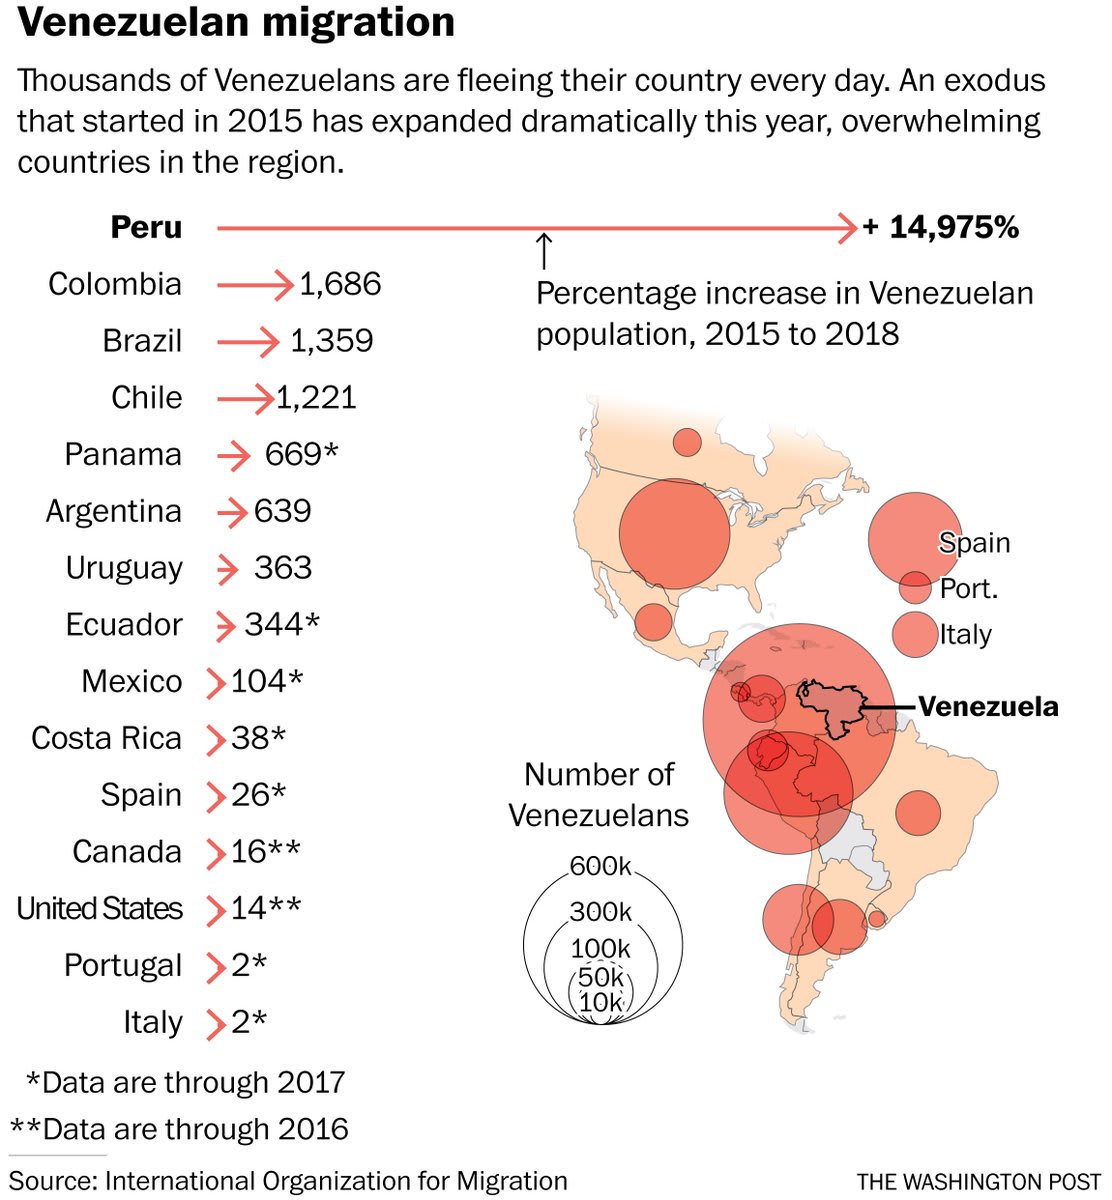 Aid groups estimate that between 1.6 million and 2 million Venezuelans will leave their nation this year, escaping hyperinflation and desperate shortages of food and medicine. Those numbers are on top of the 1.5 million who left between 2014 and 2017.